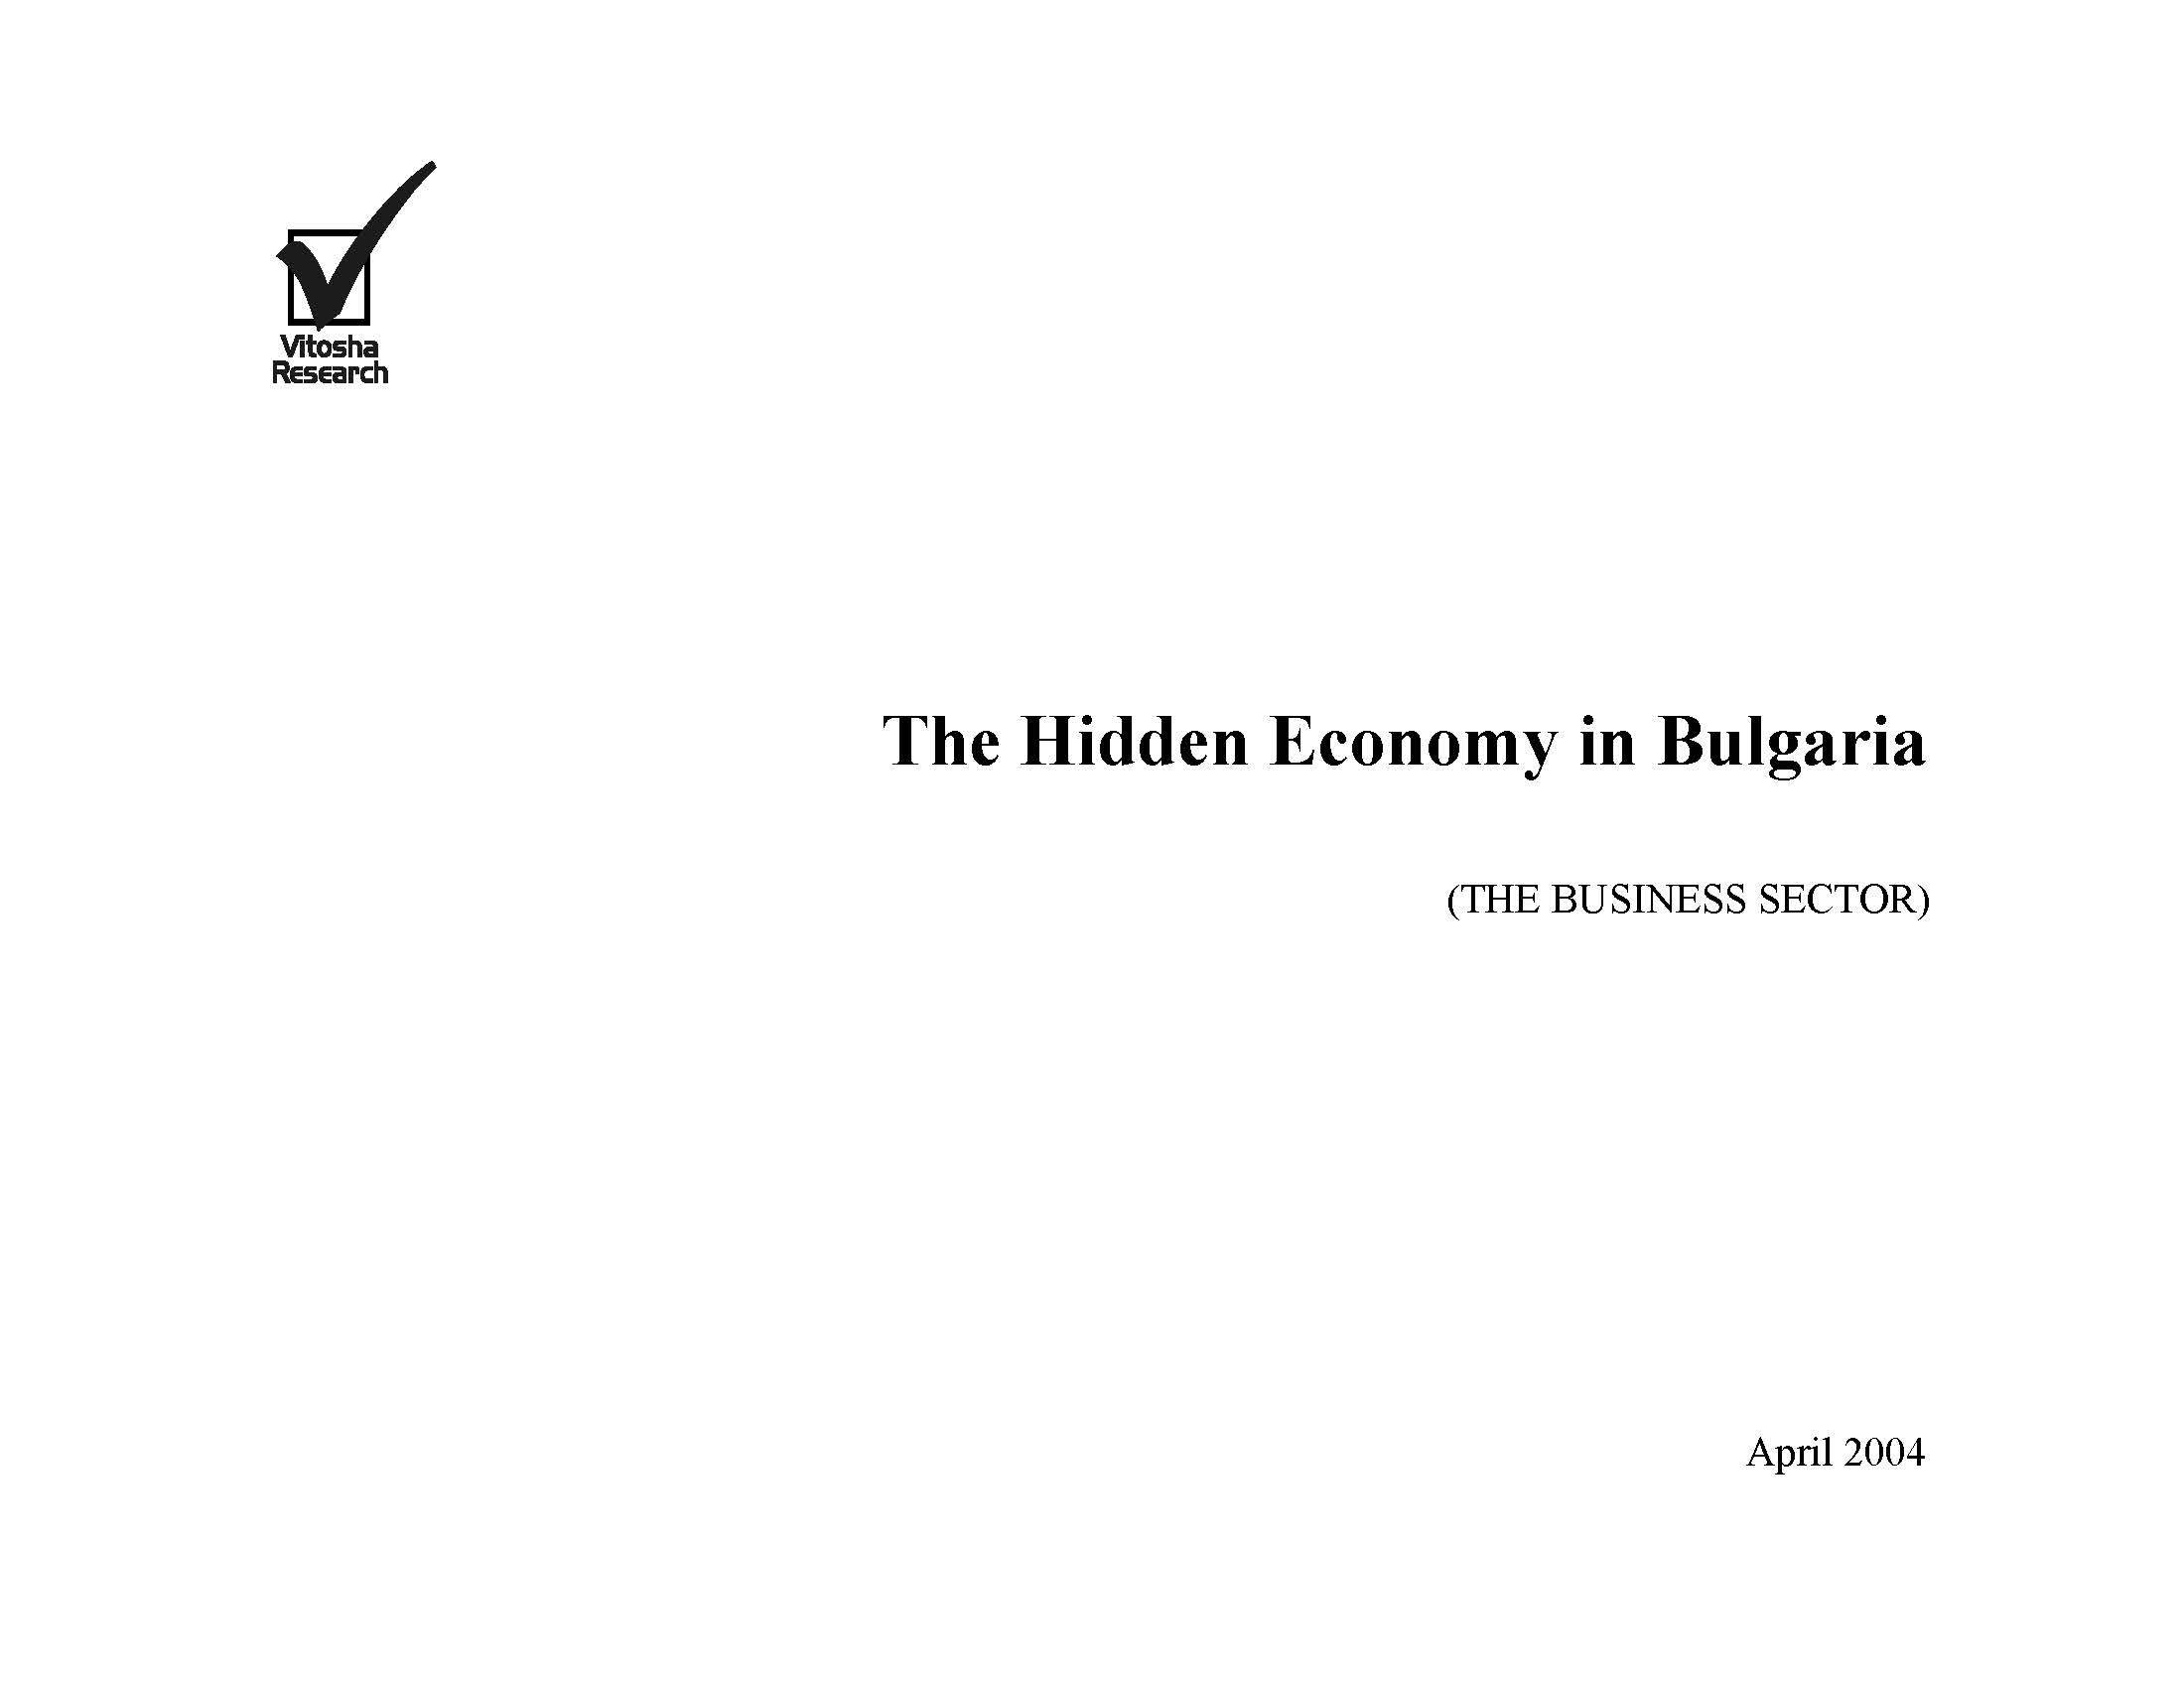 The Hidden Economy in Bulgaria (Business sector survey), April 2004 Cover Image